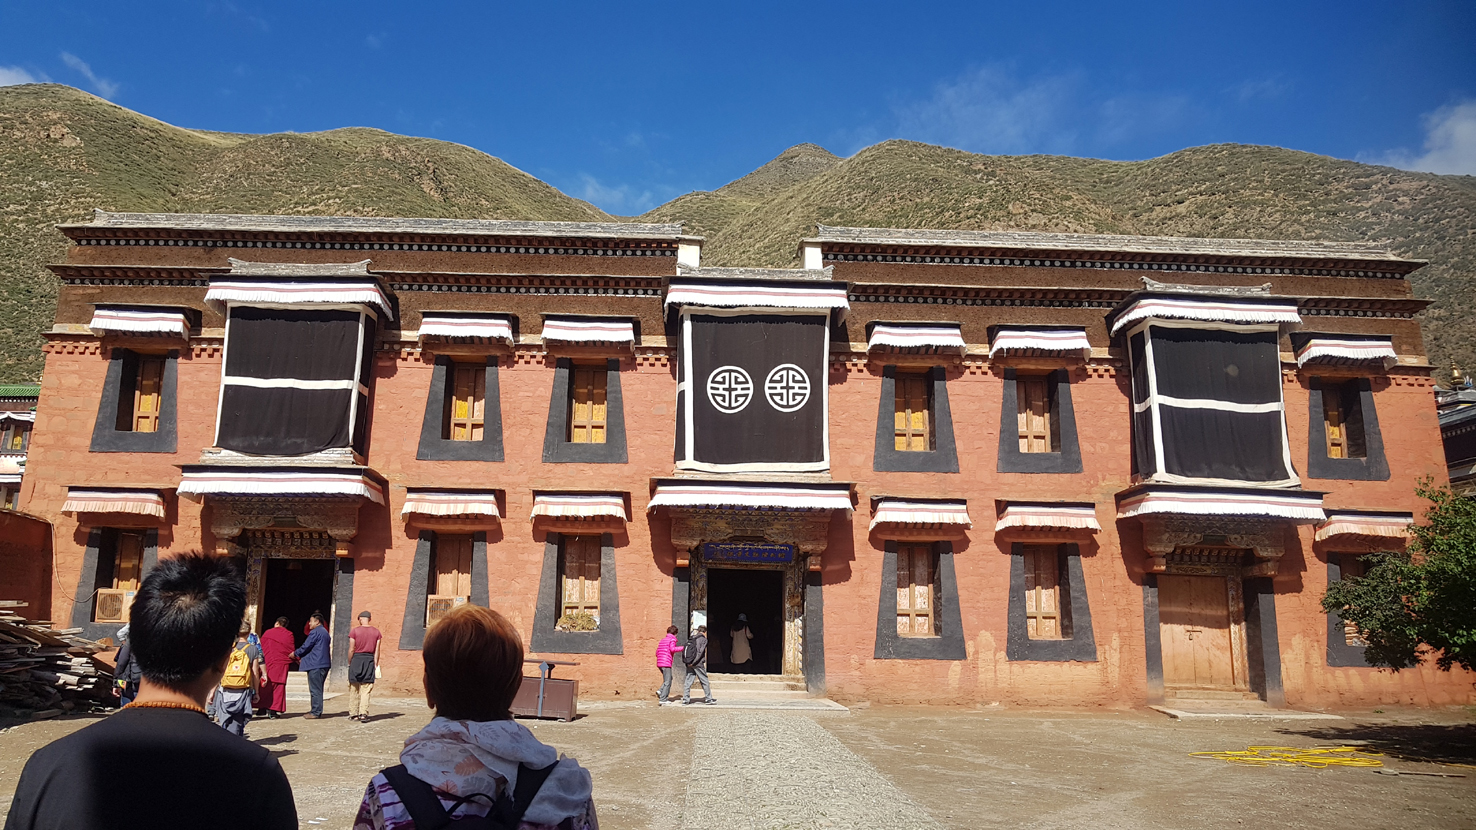 20180920_Kloster-Labrang (462)